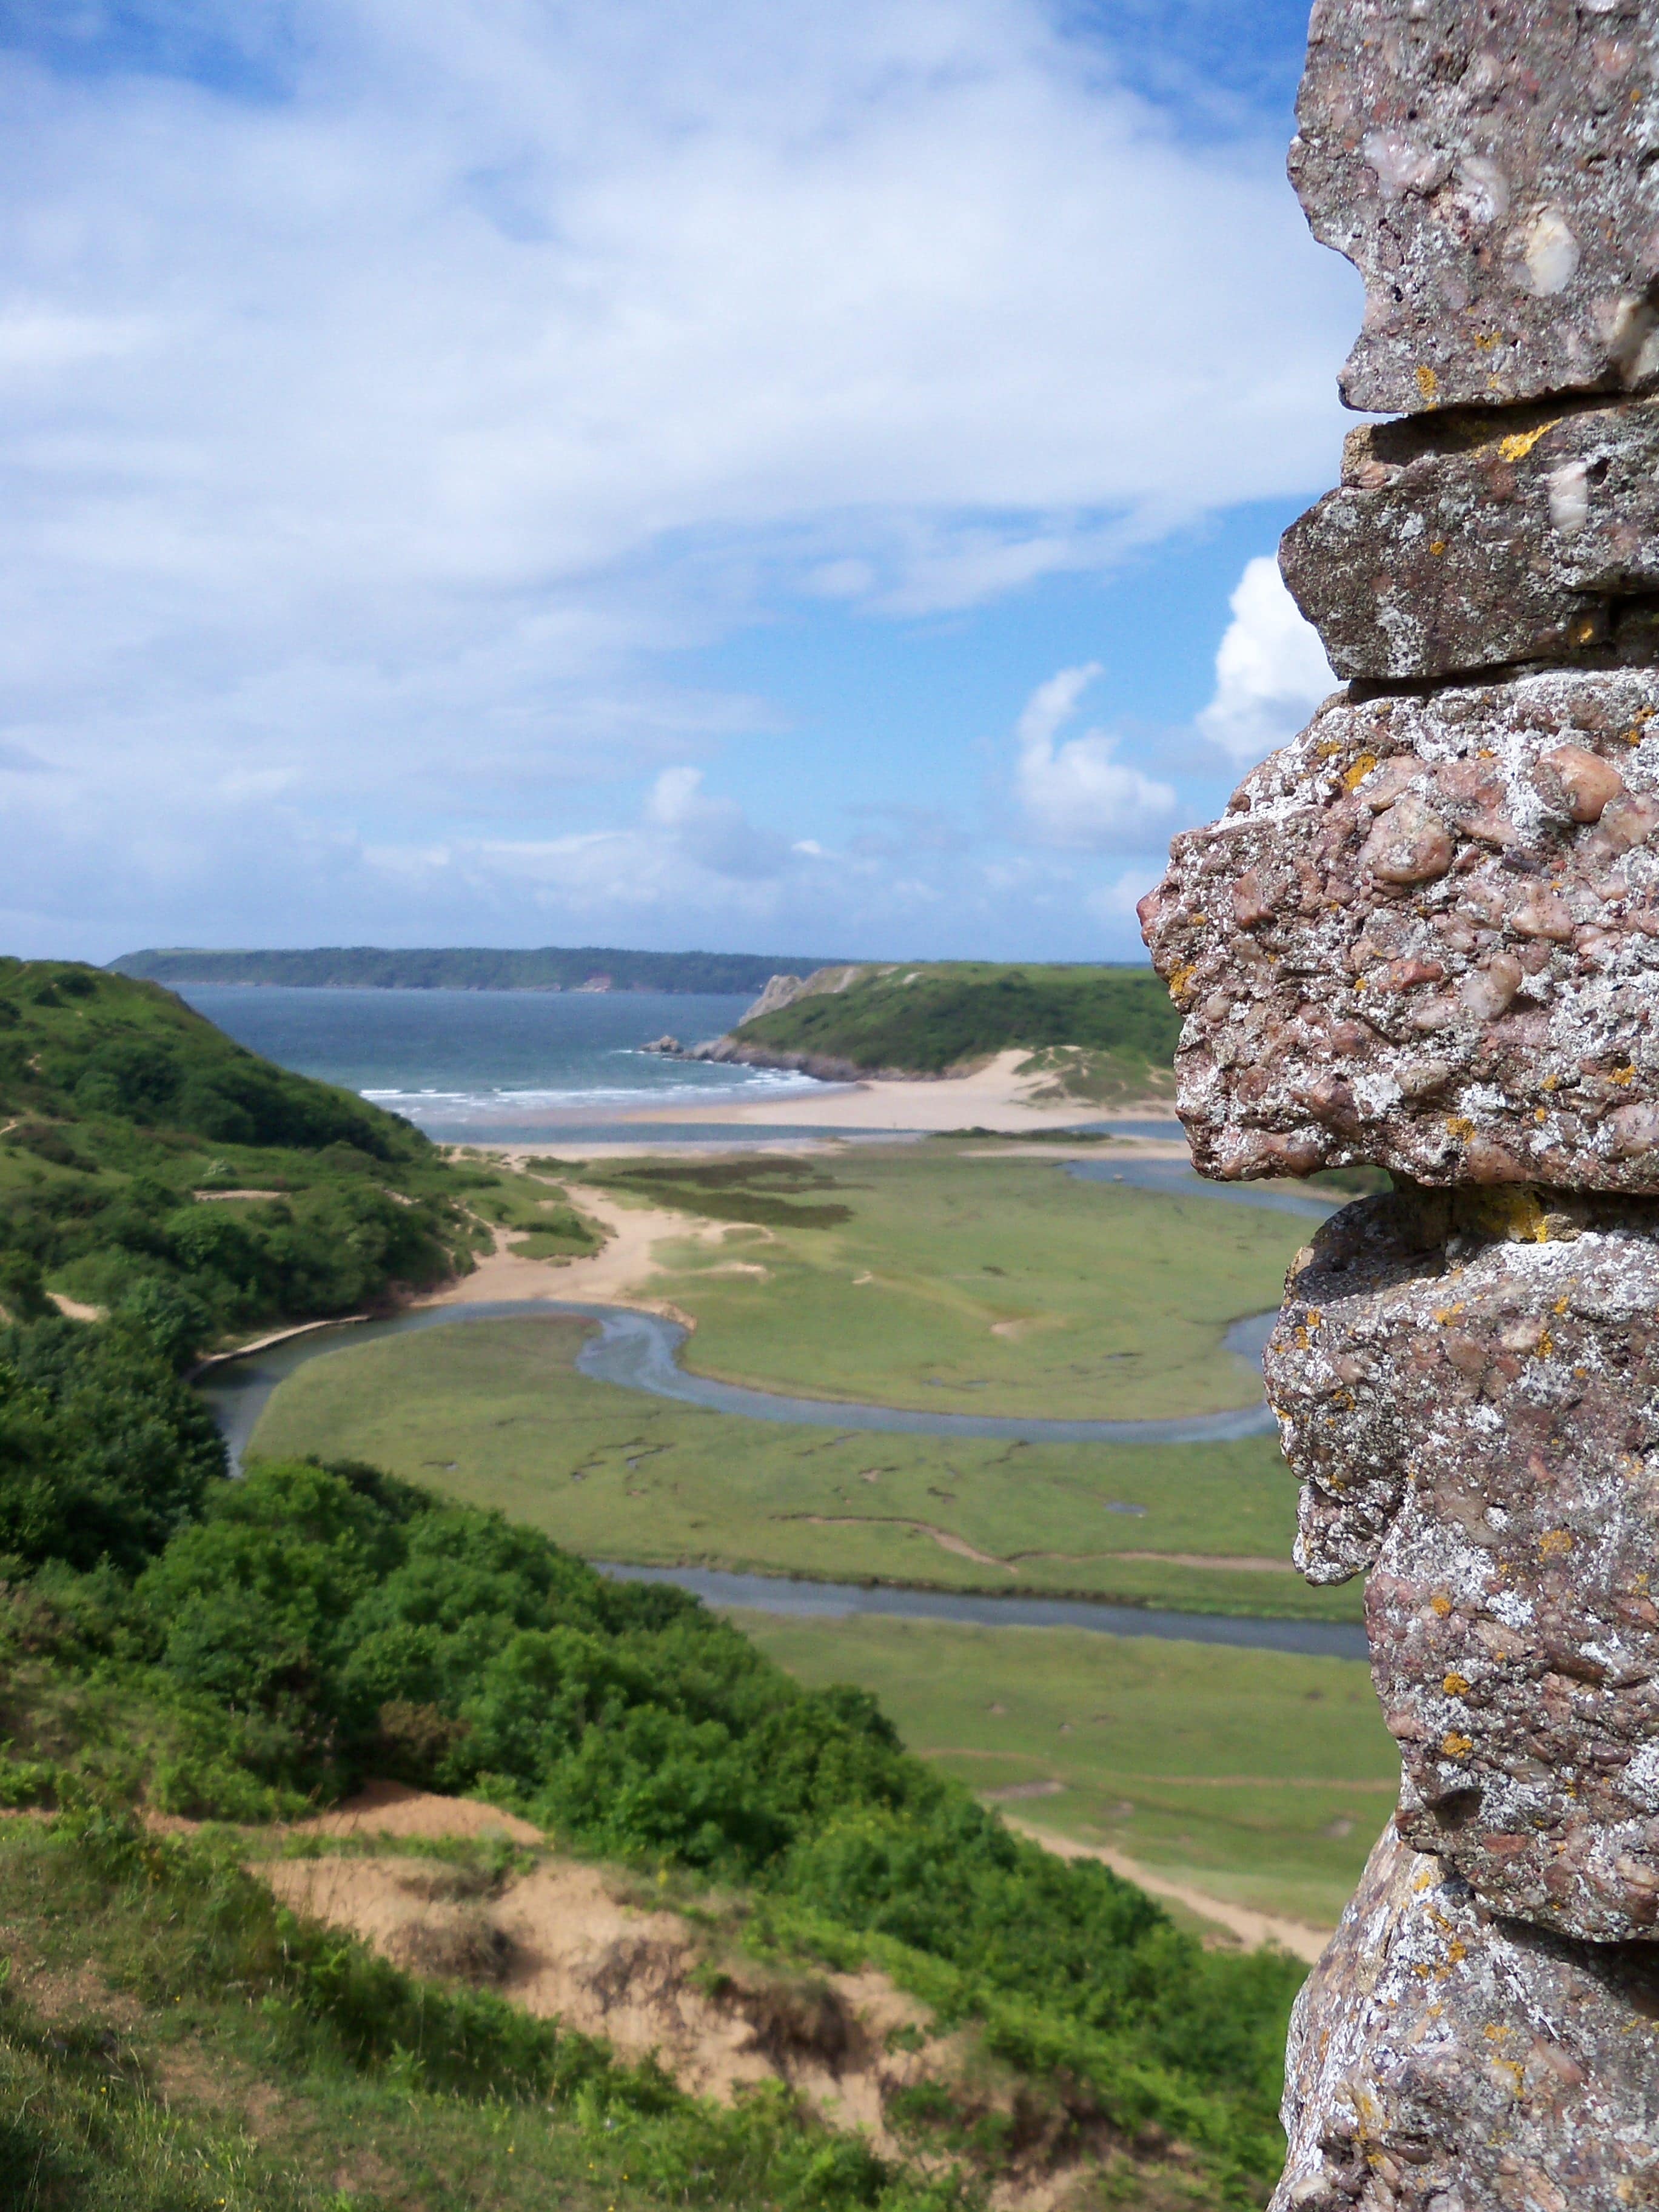 A stay in a West Wales cottage will give you access to beautiful Welsh countryside like the Gower Peninsula